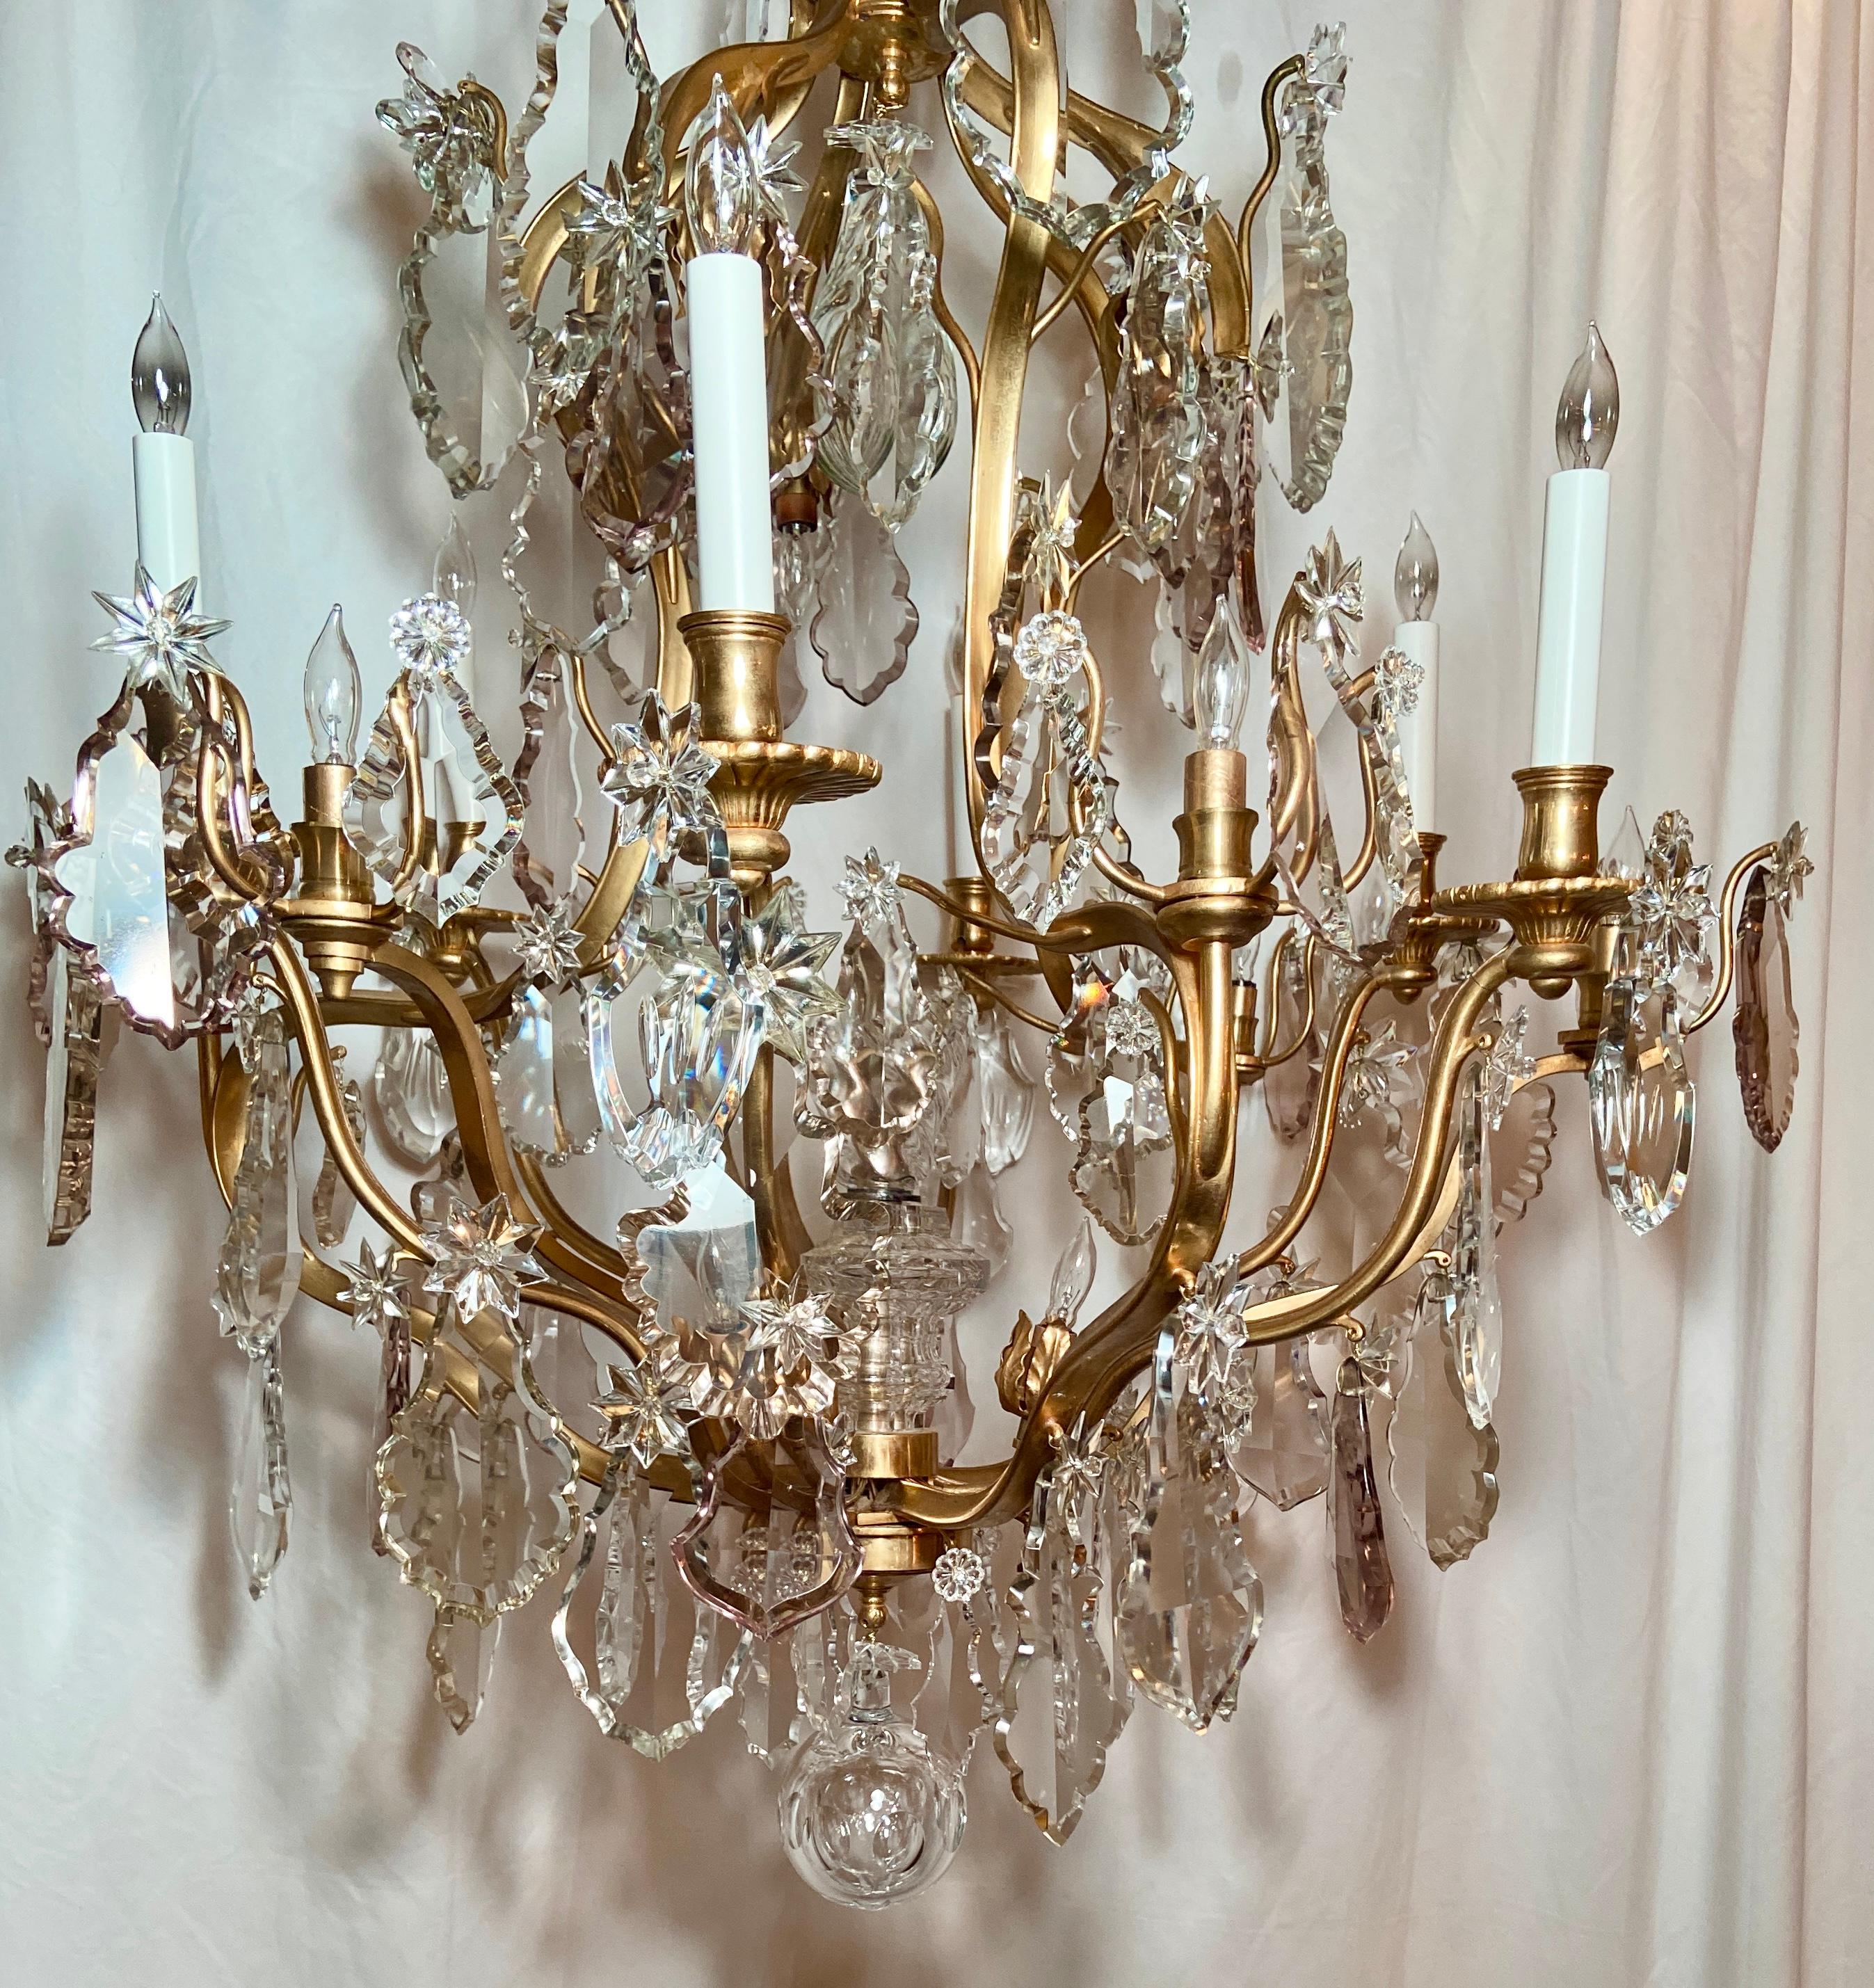 Antique French Baccarat crystal and gold bronze chandelier, Circa 1880.